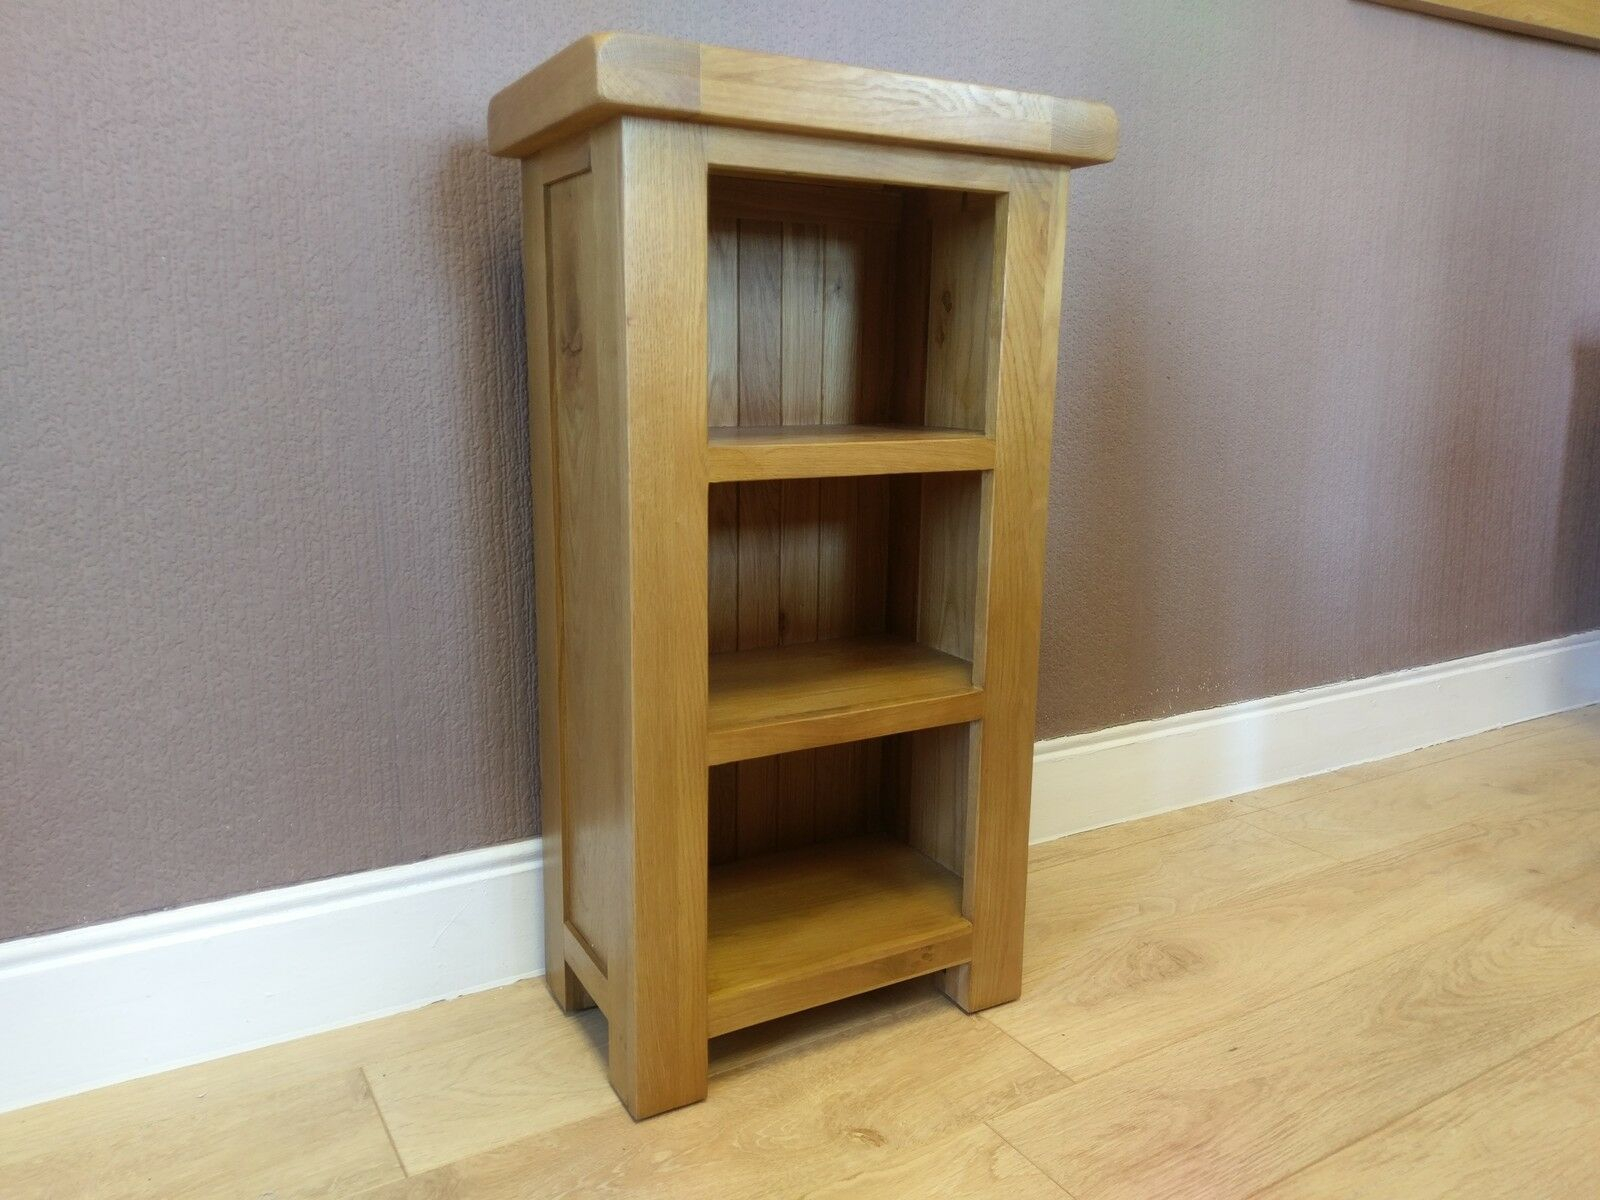 Details About Kingsford Solid Oak Small Narrow Bookcase Bookshelf Shelves 50cm 30cm 90cm in proportions 1600 X 1200